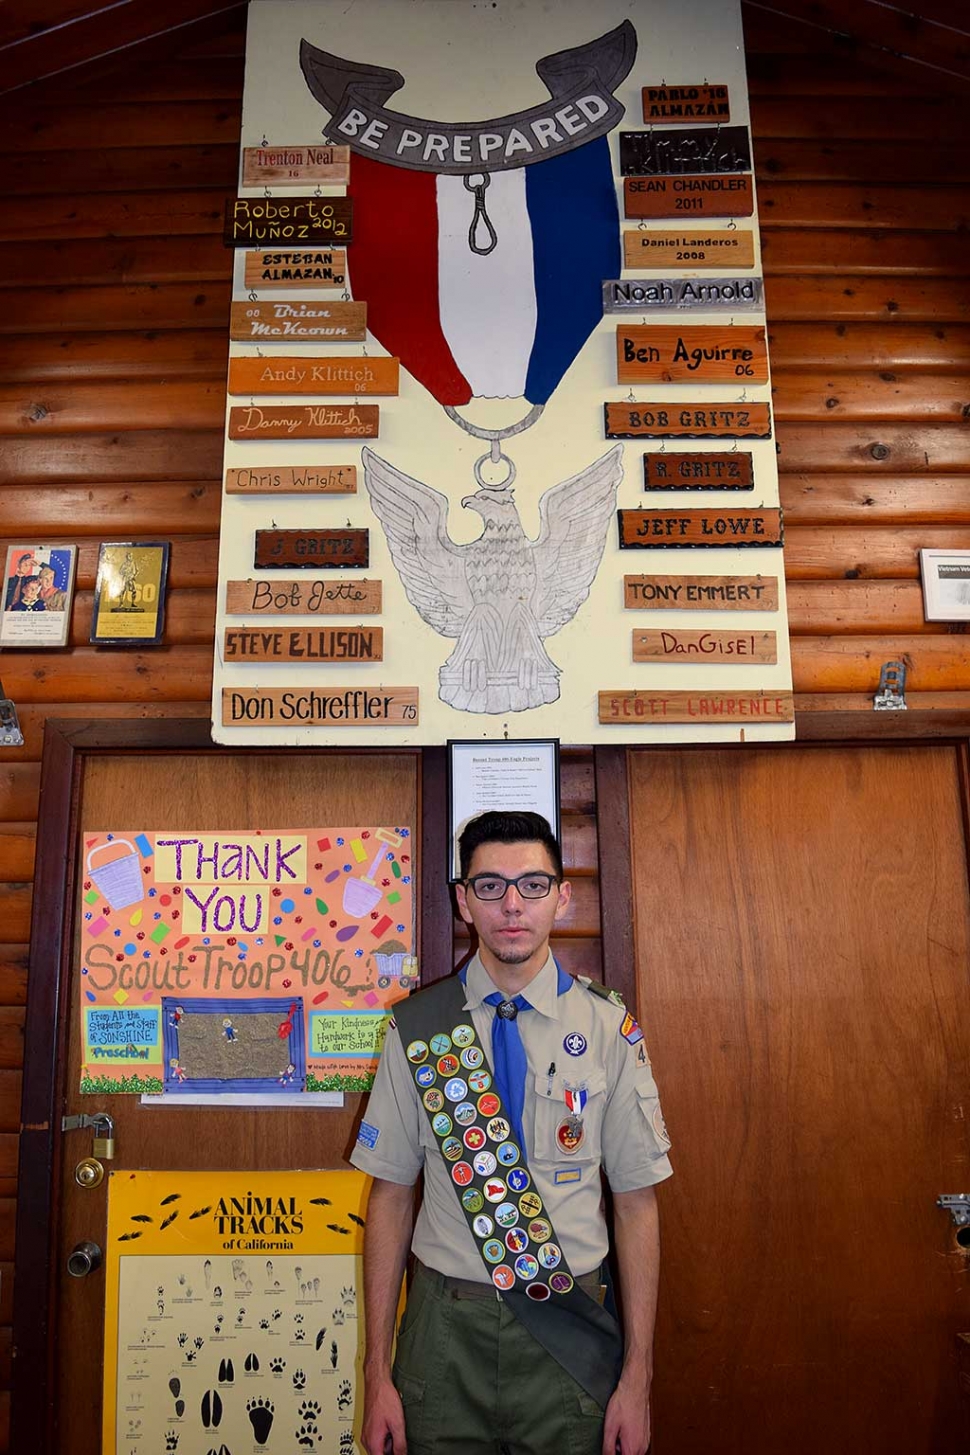 (above) Eagle Scout Pablo Almazan, before moving on to San Jose University. Pablo joined Boy Scout Troop 406 in 2009, and earned his Eagle Scout honor in June of 2016. He earned 33 merit badges and held leadership positions up to senior patrol leader and troop guide. His Eagle Scout project took place at Rancho Camulos, including adding a new flagpole on front lawn with brick finish, and planters. More than 225 hours were spent on the project. Pablo is now attending San Jose State University. Donors: Fillmore Welding, Fillmore Rental, Fillmore Building Supply, Patterson Hardware, Cemex, Aswell Trophy, Advanced Bellows Inc., Otto and Sons, Martin Hernandez, Boy Scouts and parents of Troop 406.